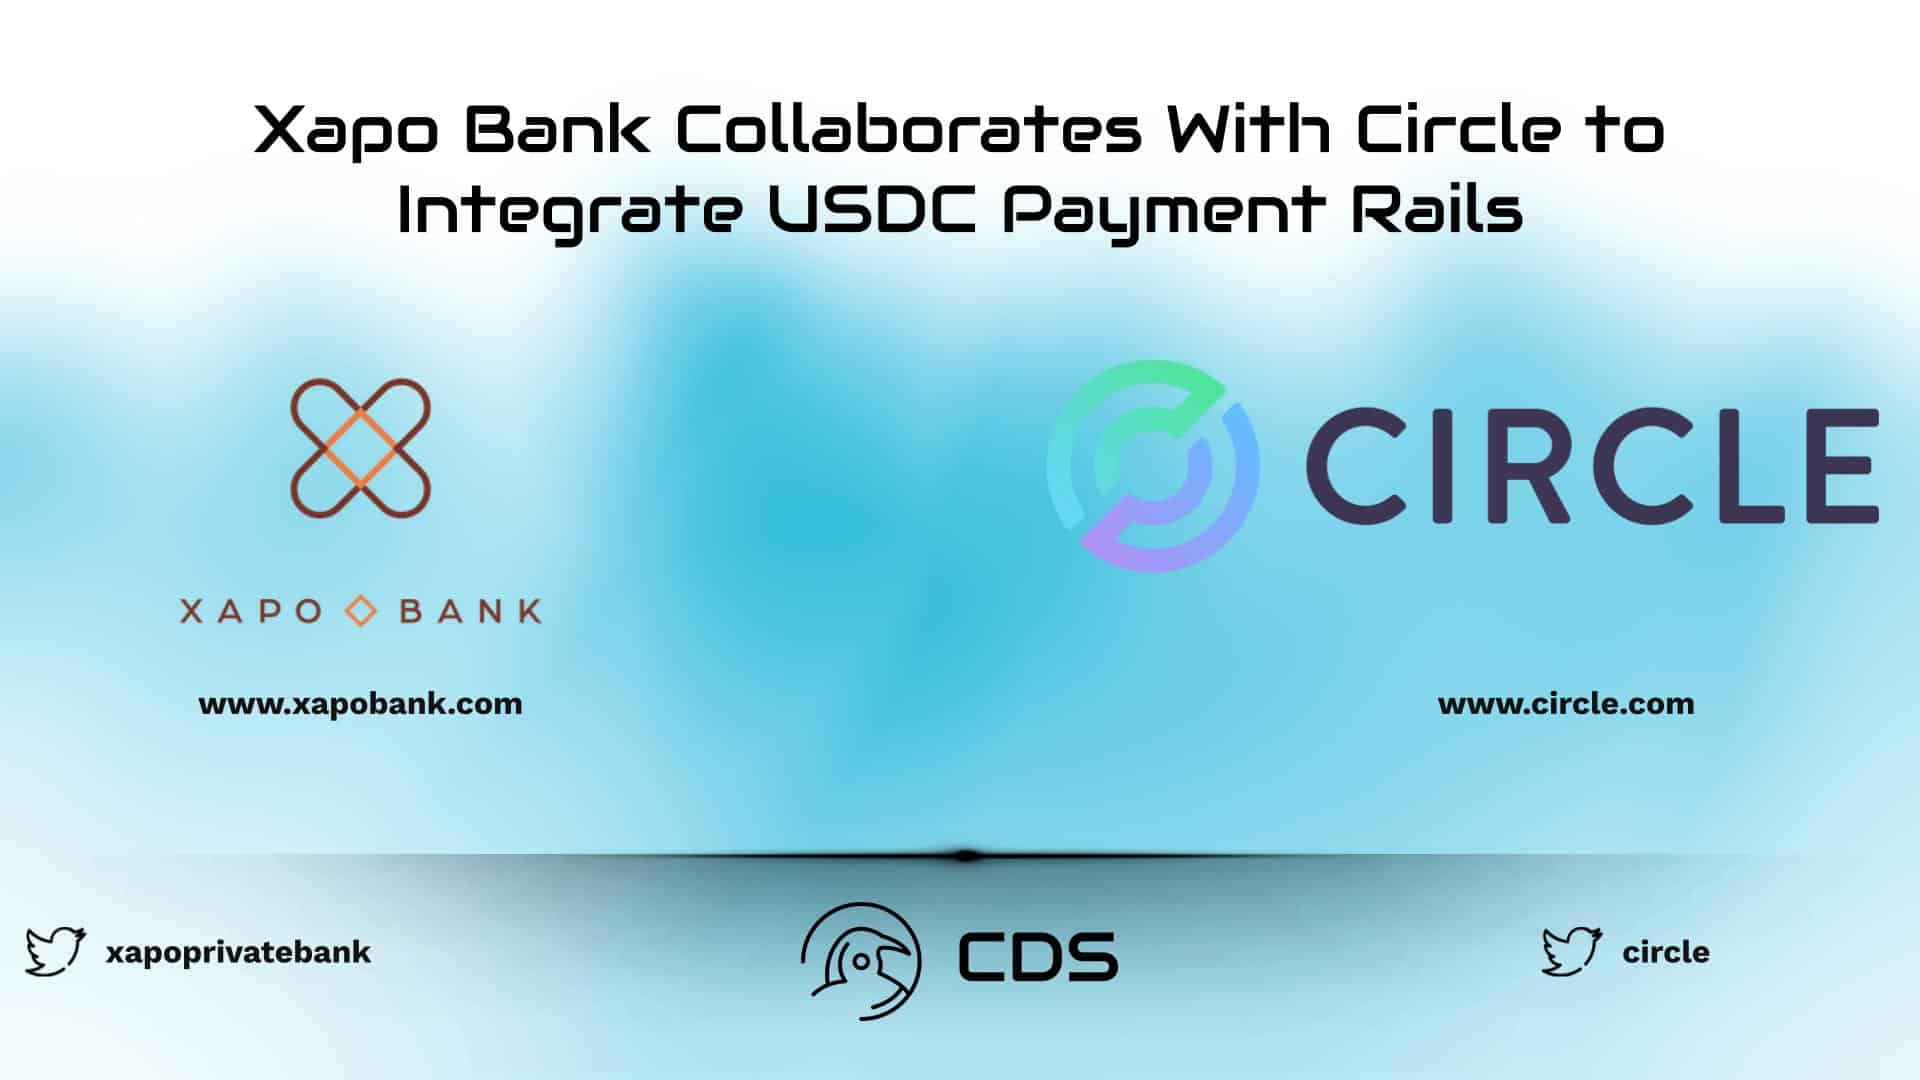 Xapo Bank Collaborates With Circle to Integrate USDC Payment Rails